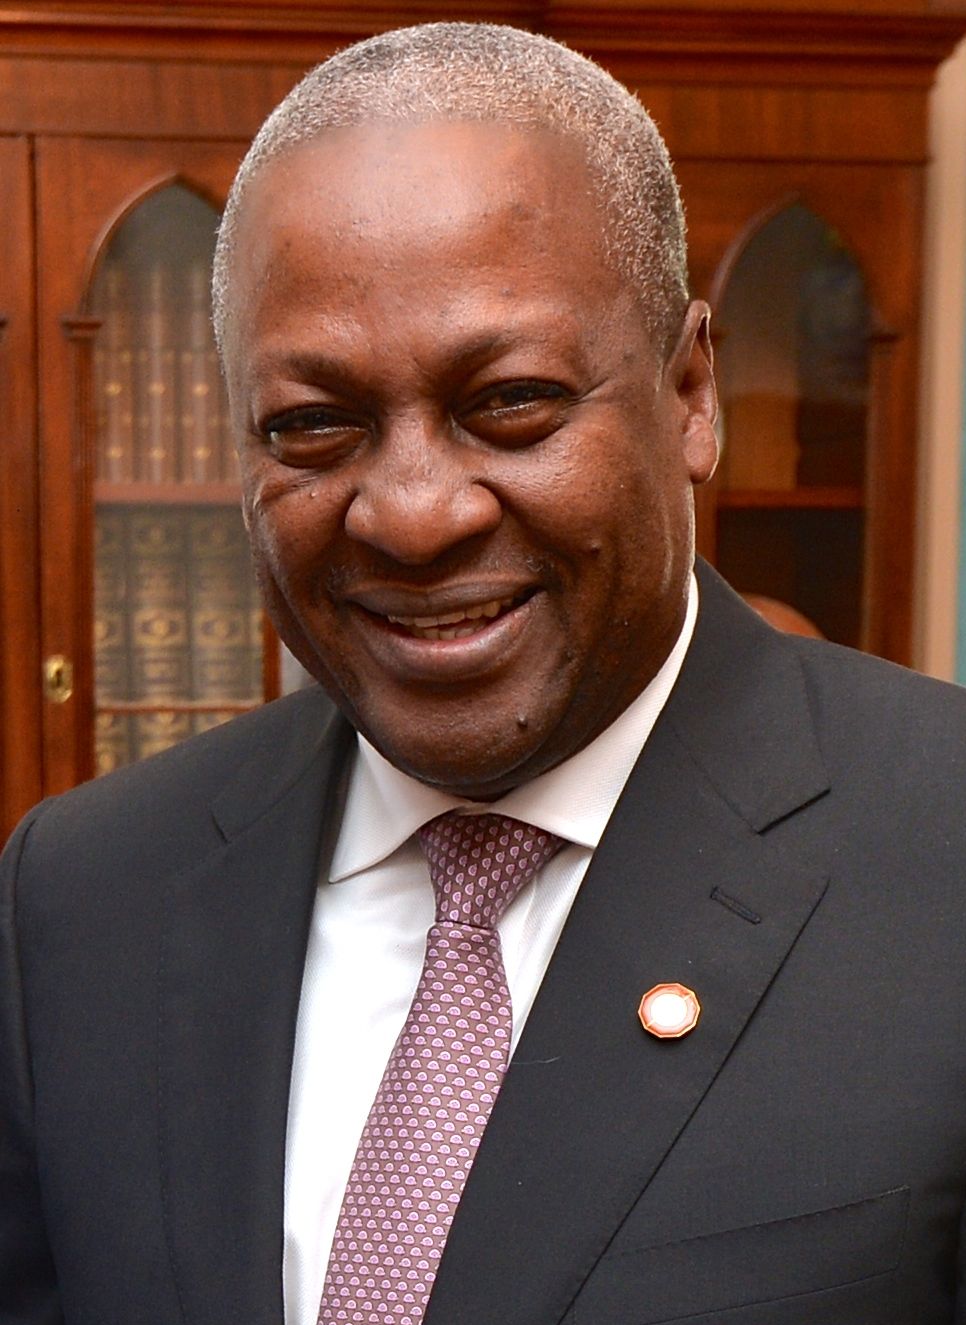 Ghana’s opposition candidate Mahama rejects election results